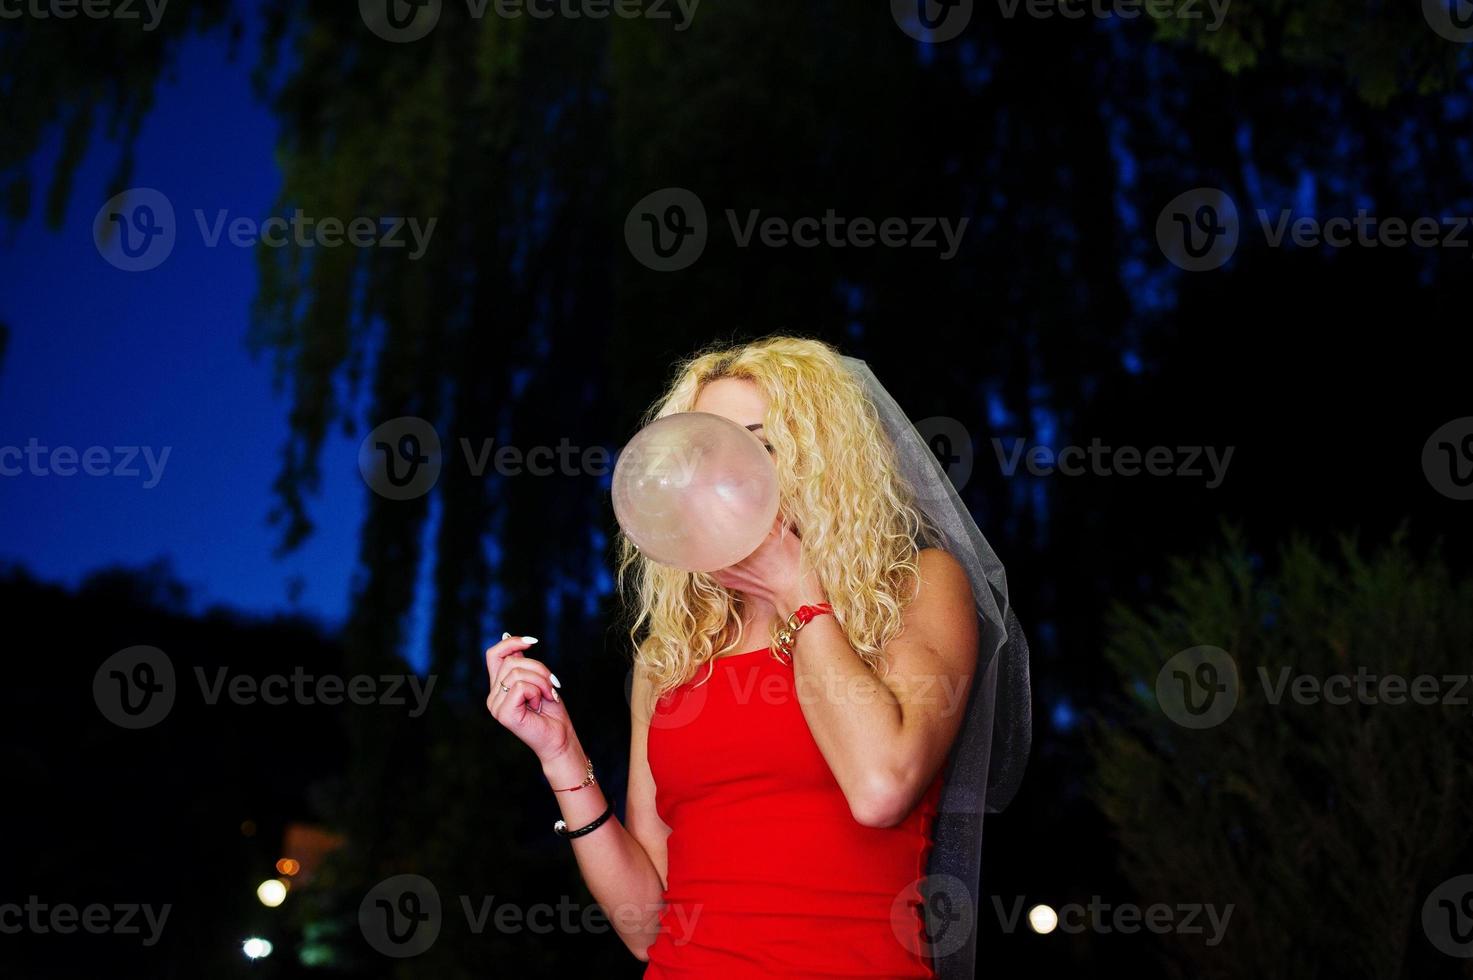 Crazy bride in red dress and veil inflating condom at her bachelorette party. photo